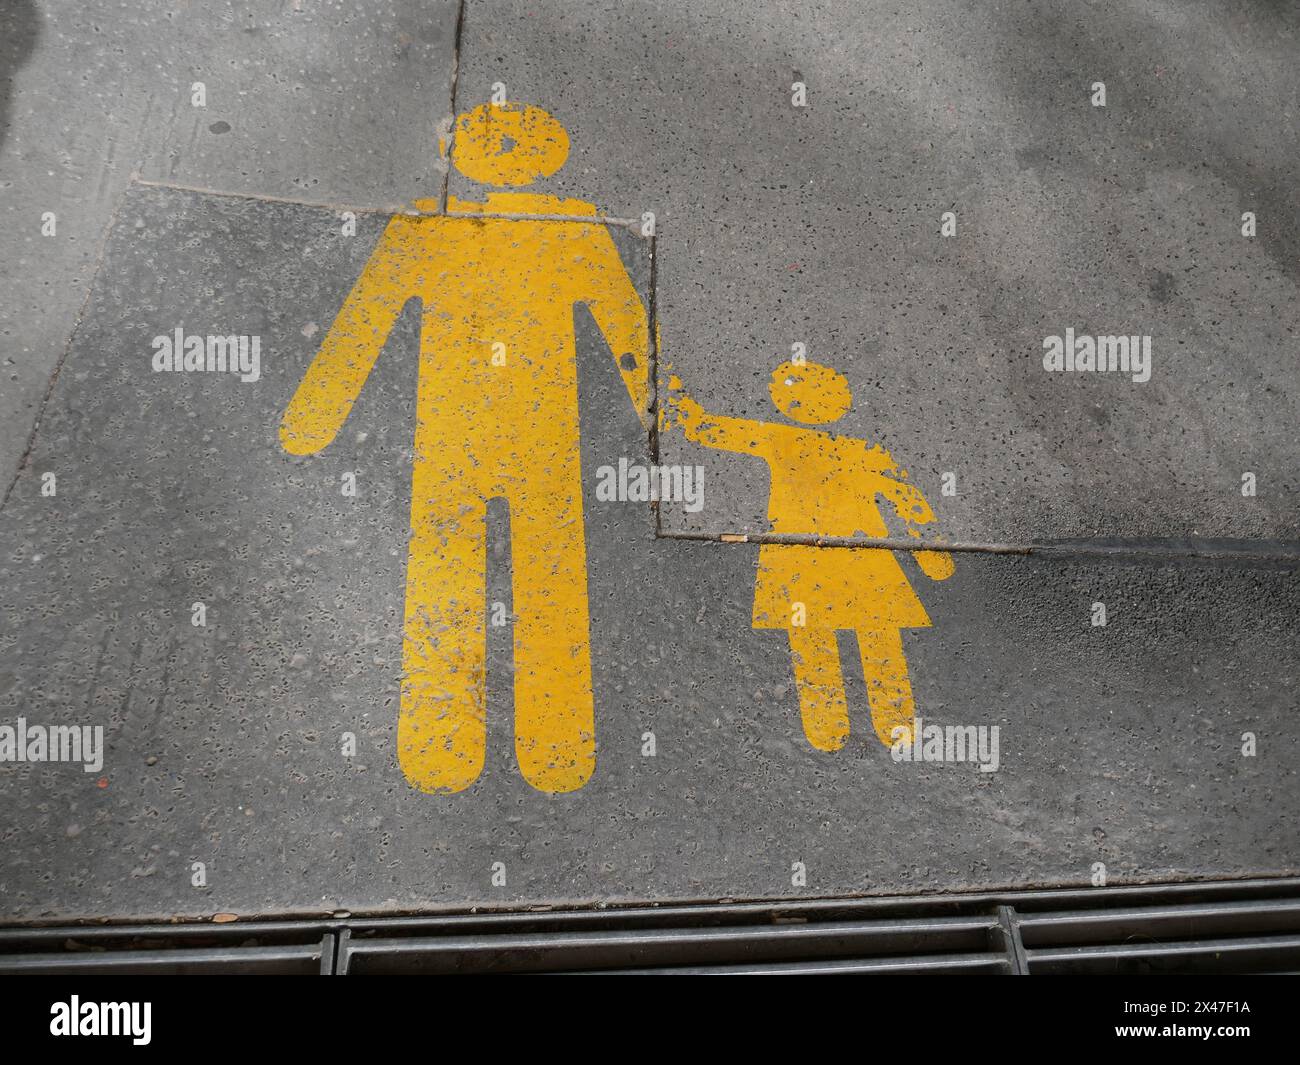 Pedestrian zone sign painted on road surface in Europe with parent holding child's hand Stock Photo